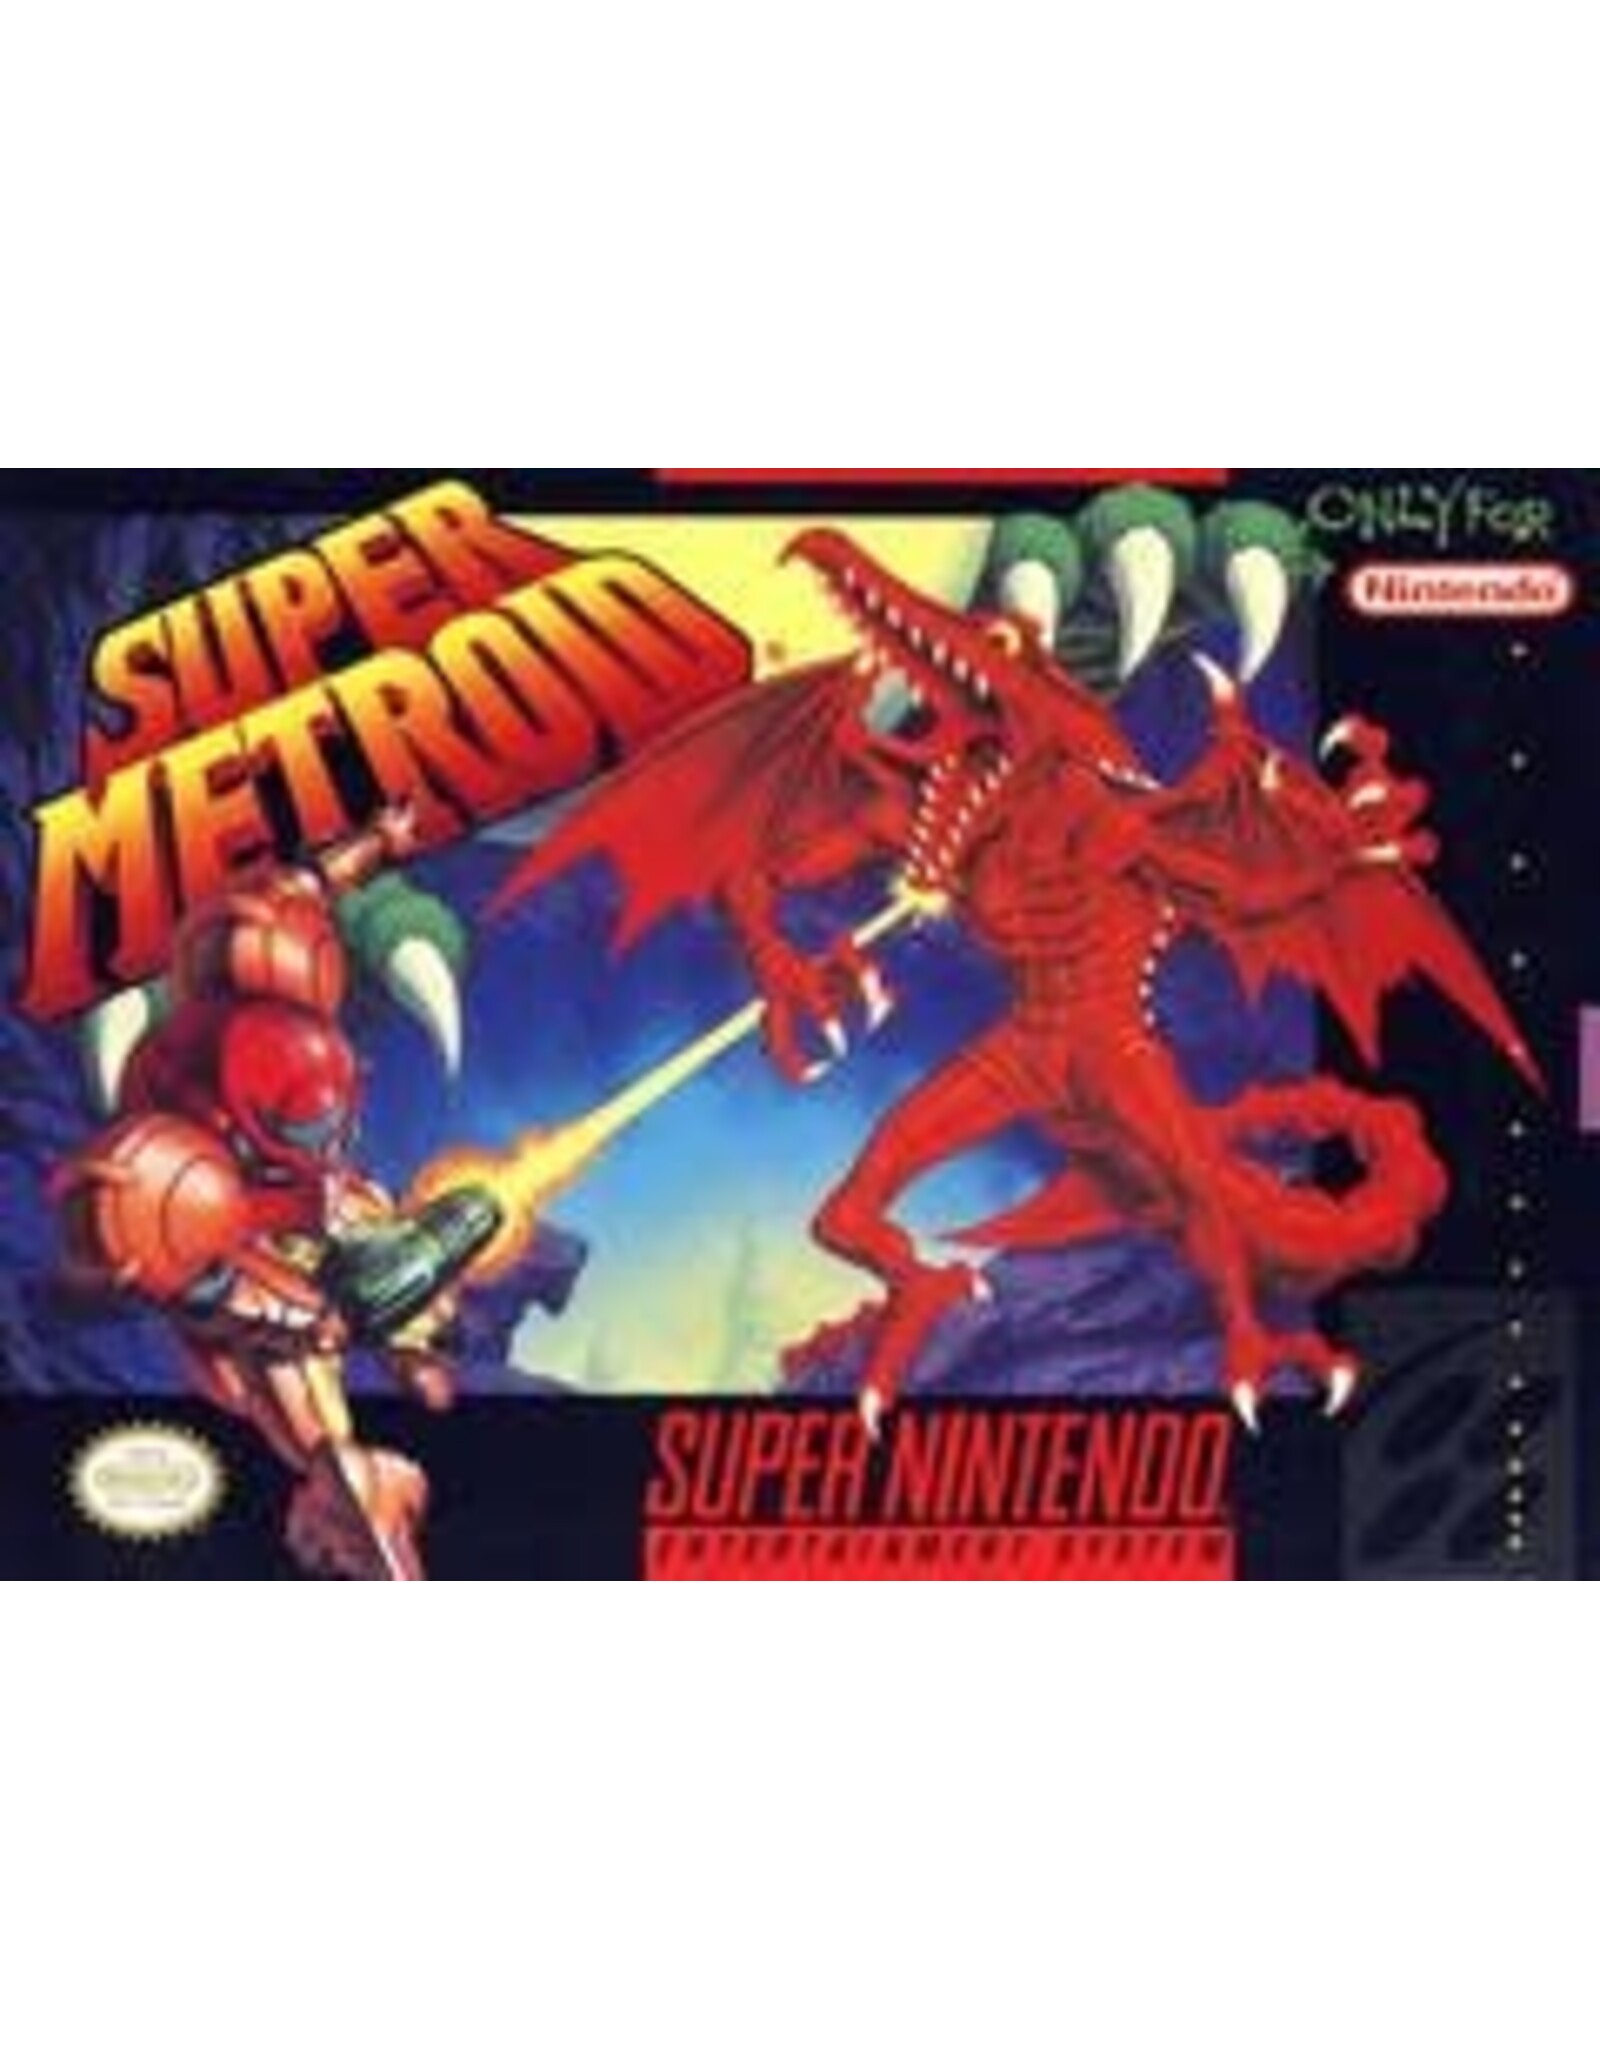 Nintendo Used Game - SNES - Super Metroid [Cart Only]